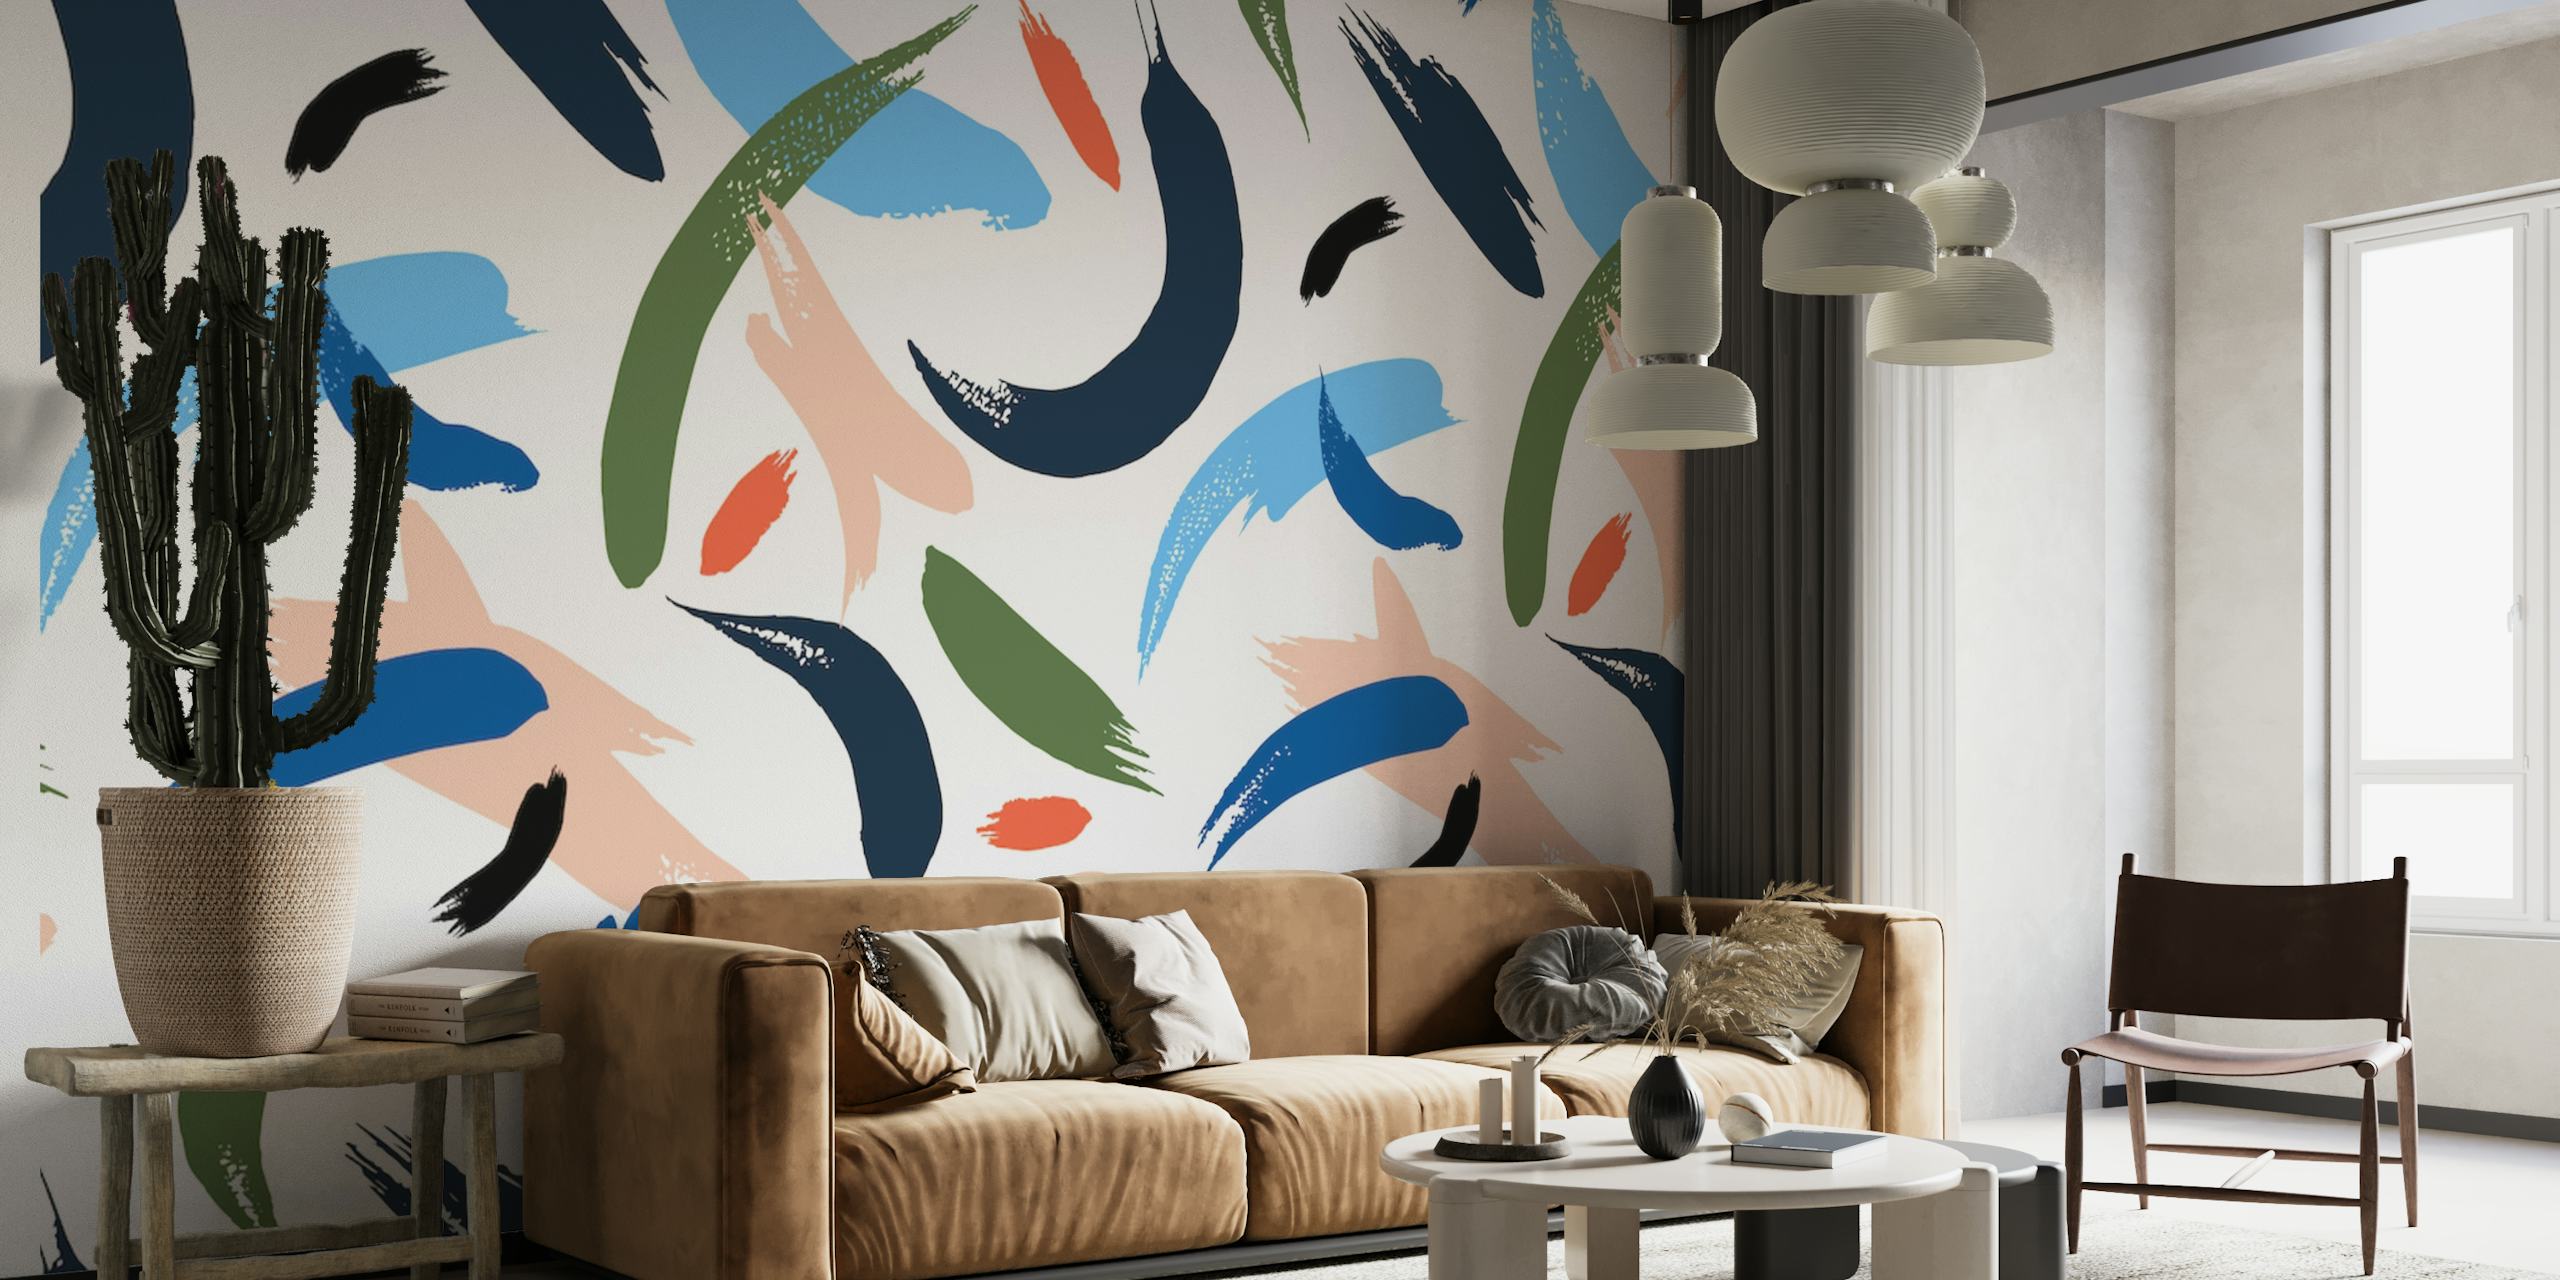 Abstract wall mural with teal, salmon, black, and olive brushstrokes on a white background